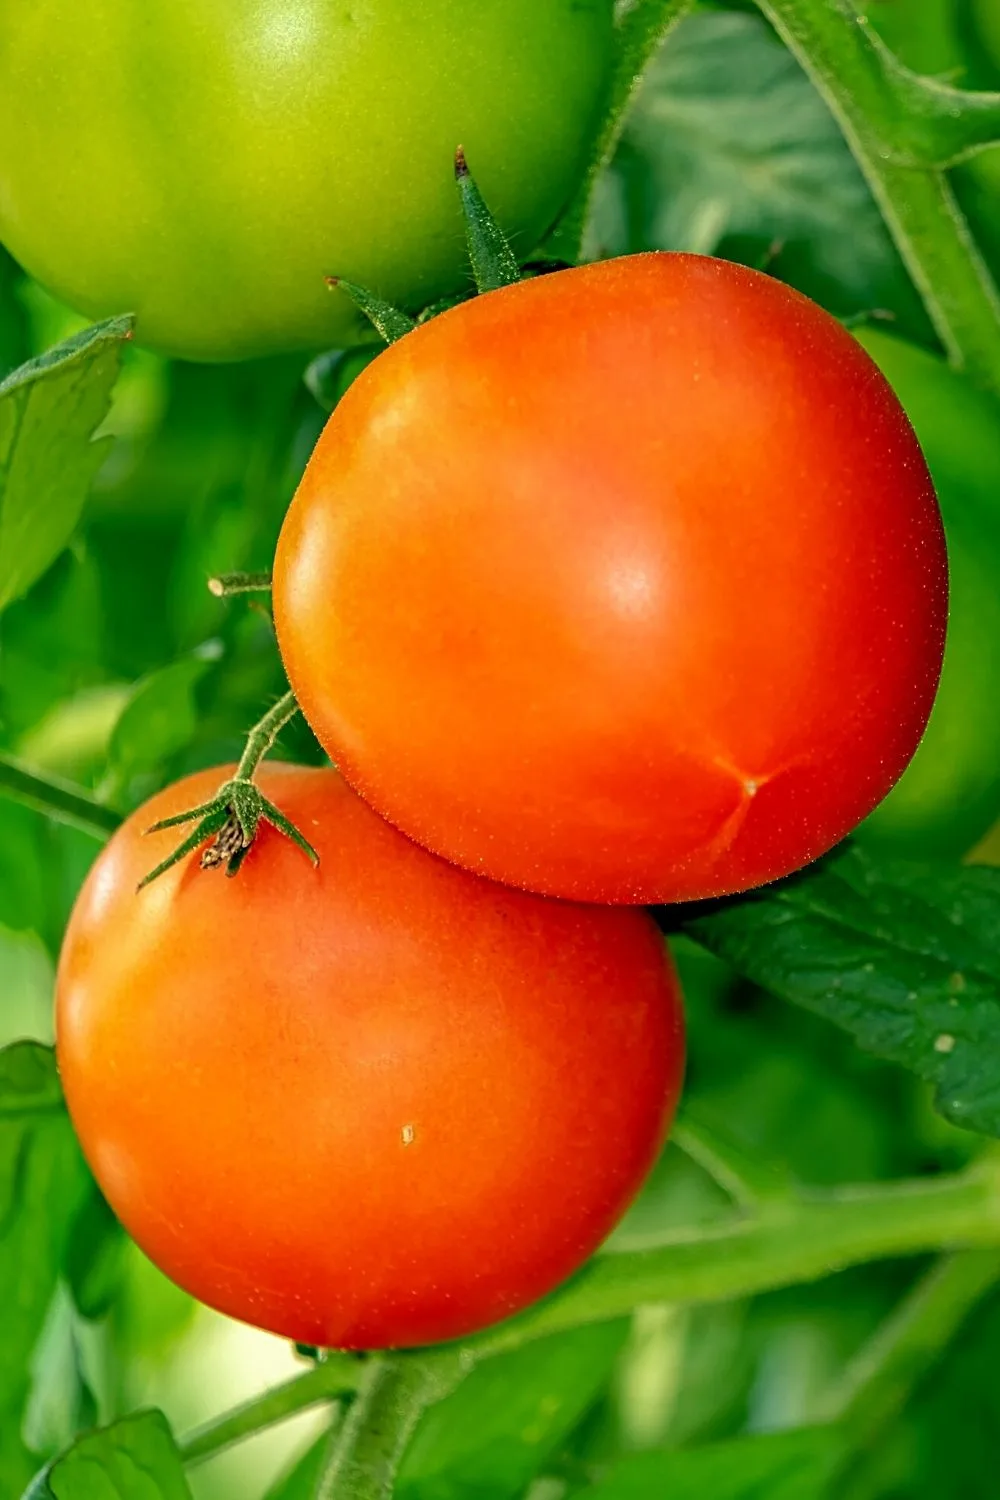 Tomatoes are great edible plants to add to your growing edible plant collection in your south-facing balcony